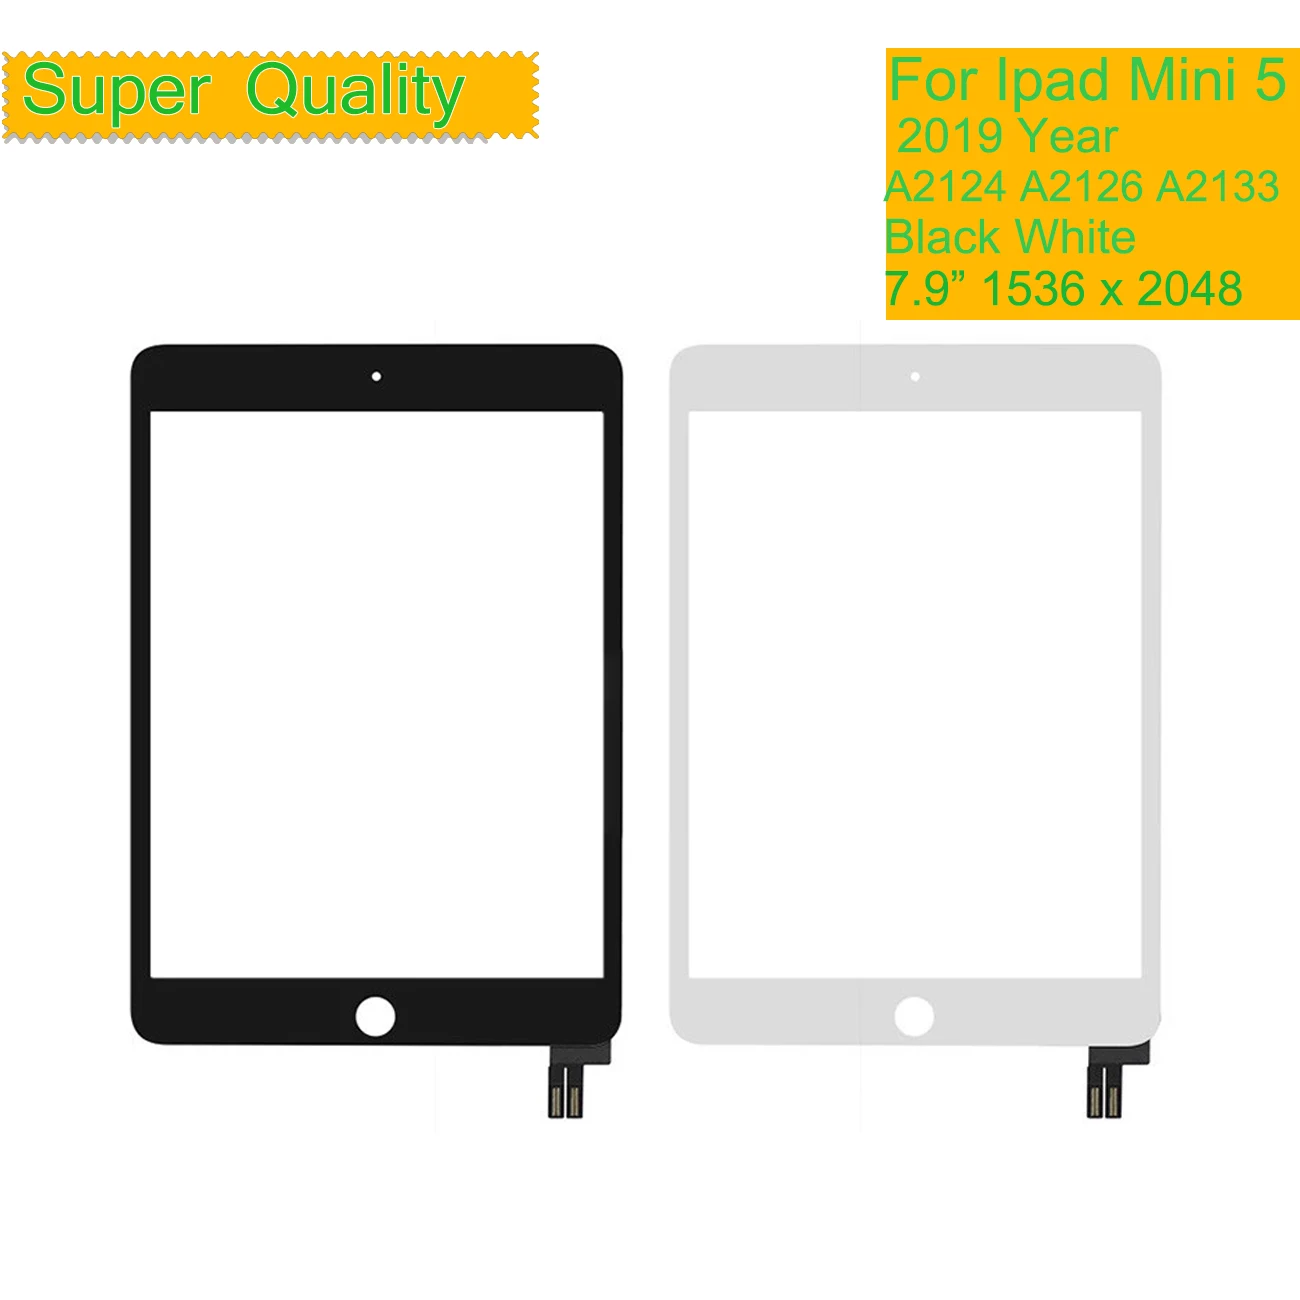 10Pcs/Lot For Apple iPad Mini 5 Touch Screen Digitizer Panel For iPad Mini 5 2019 A2124 A2126 A2133 LCD Front Outer Glass Sensor 5 7 digitzer for asus zenfone max plus m1 zb570tl touch screen x018d touchscreen x018dc digitizer sensor outer glass